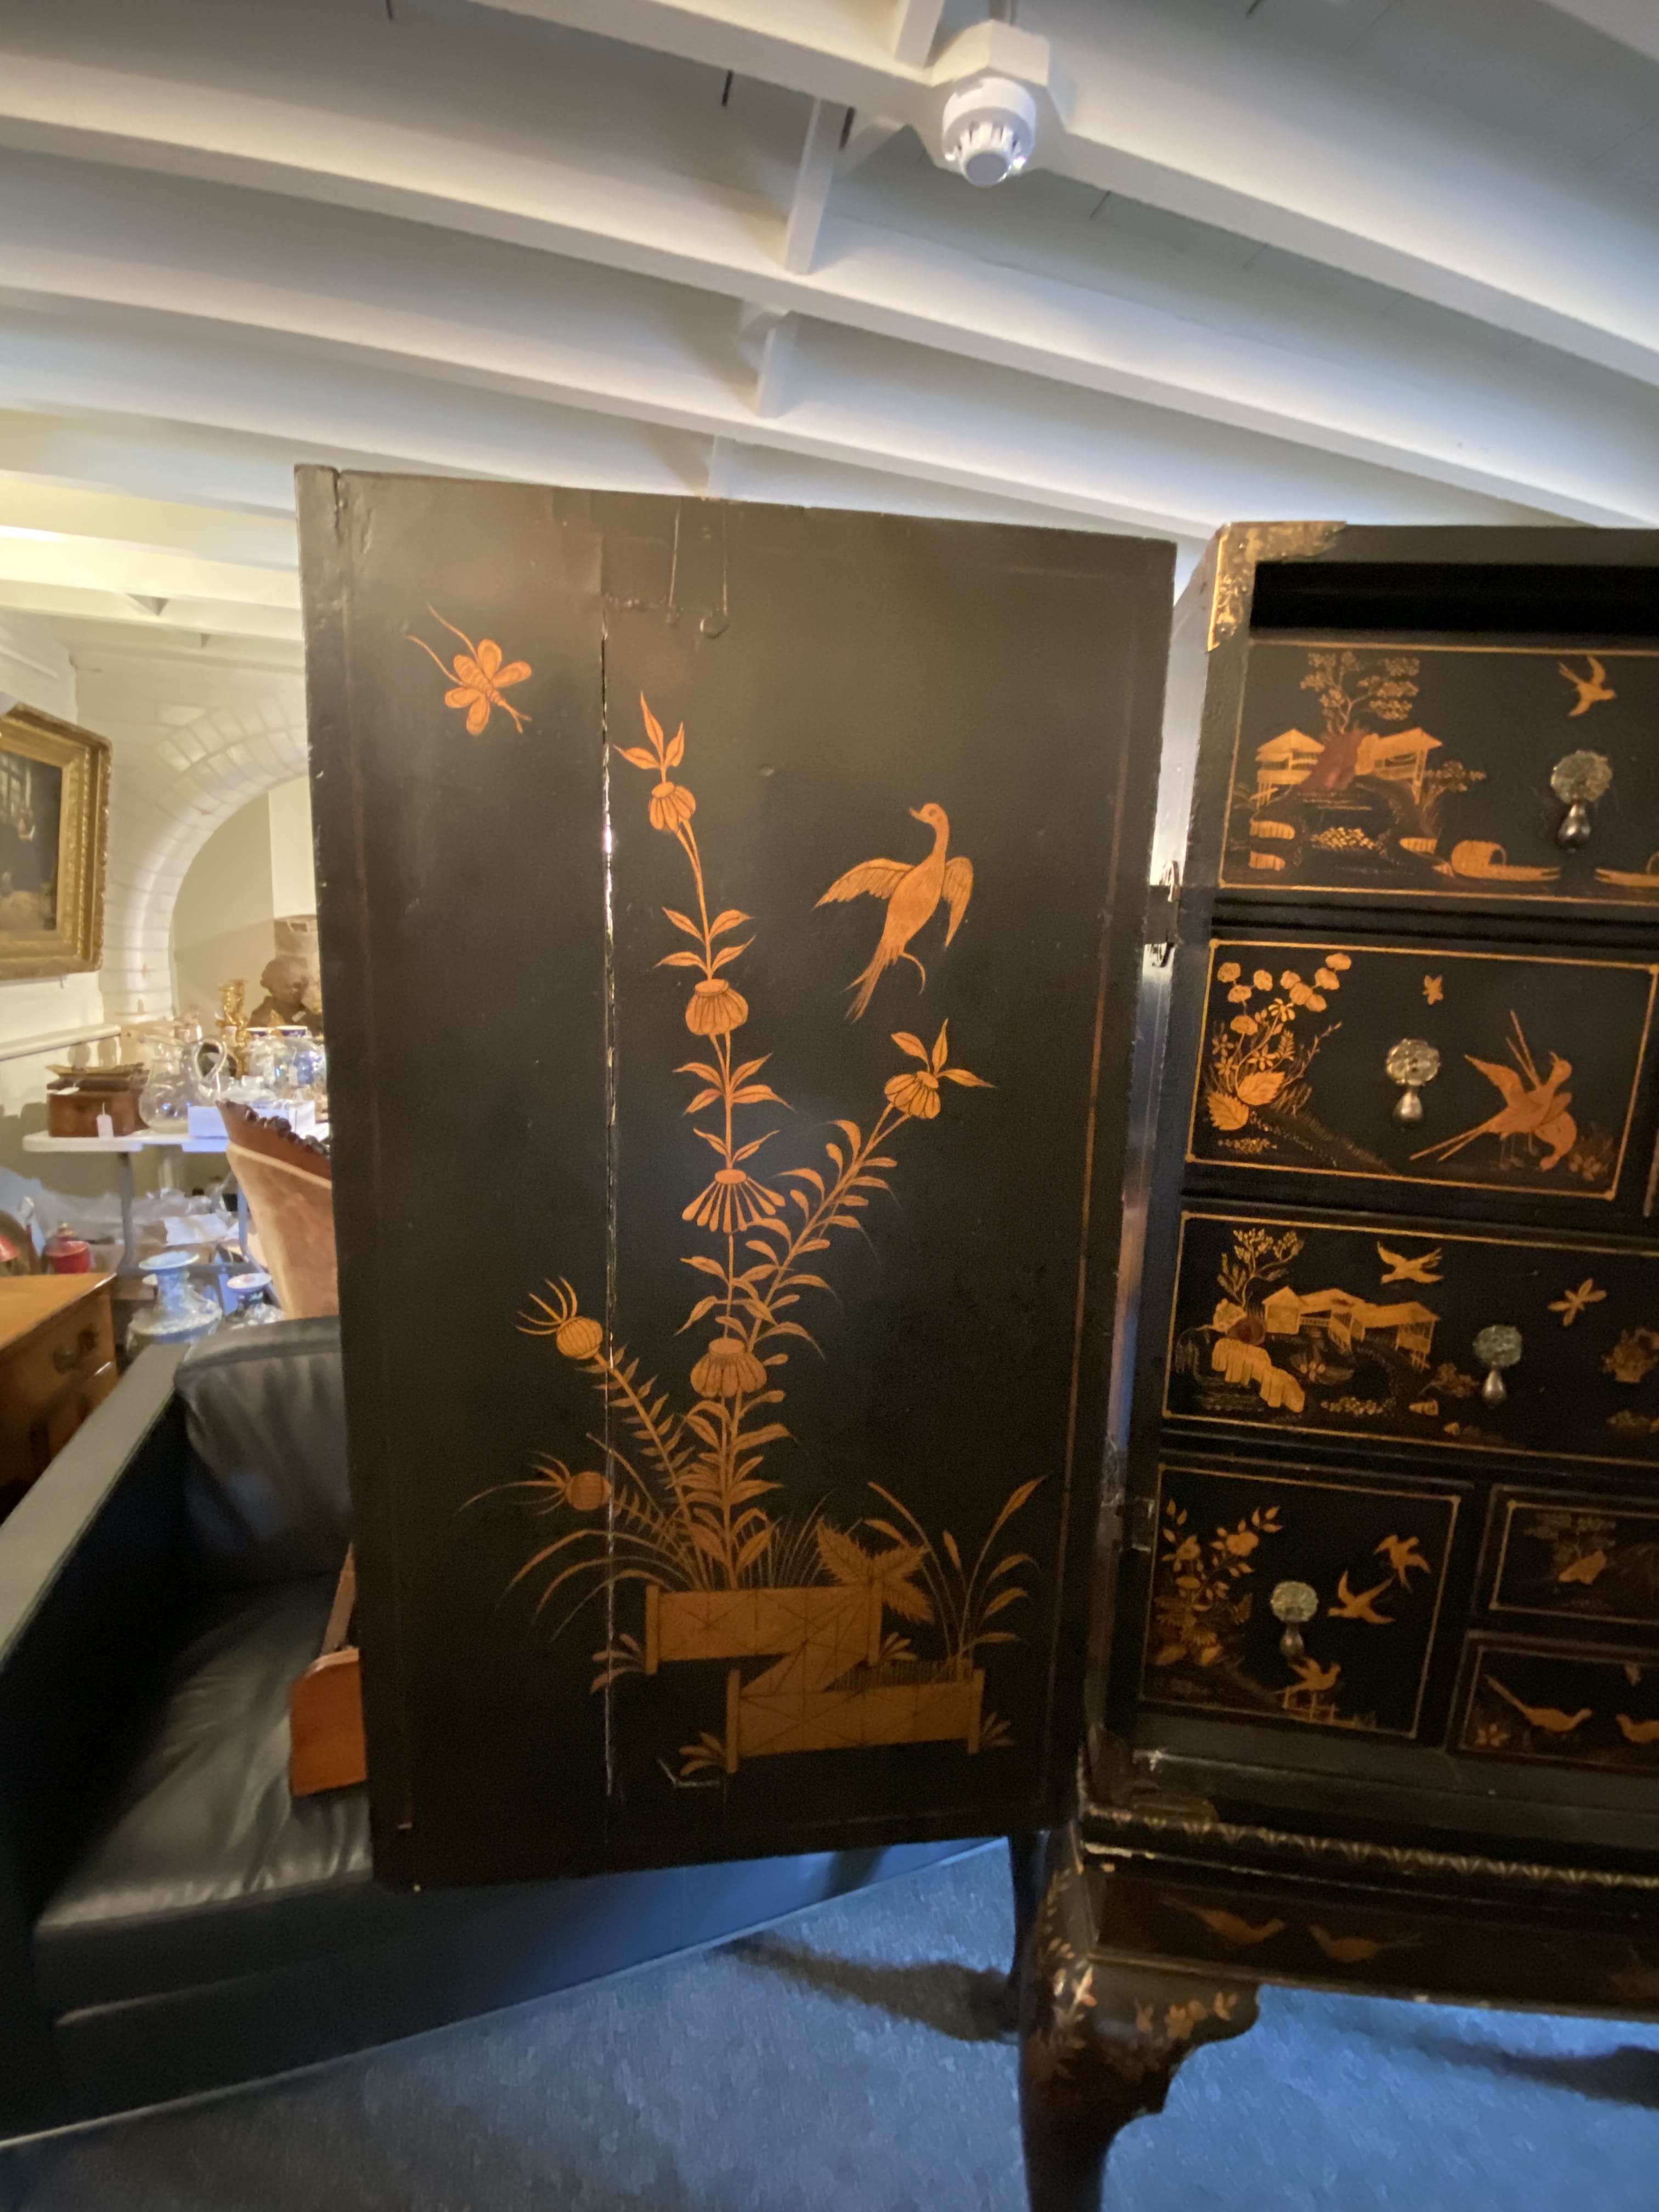 An early 18th century Chinese export black lacquer cabinet on a European stand - Image 13 of 36